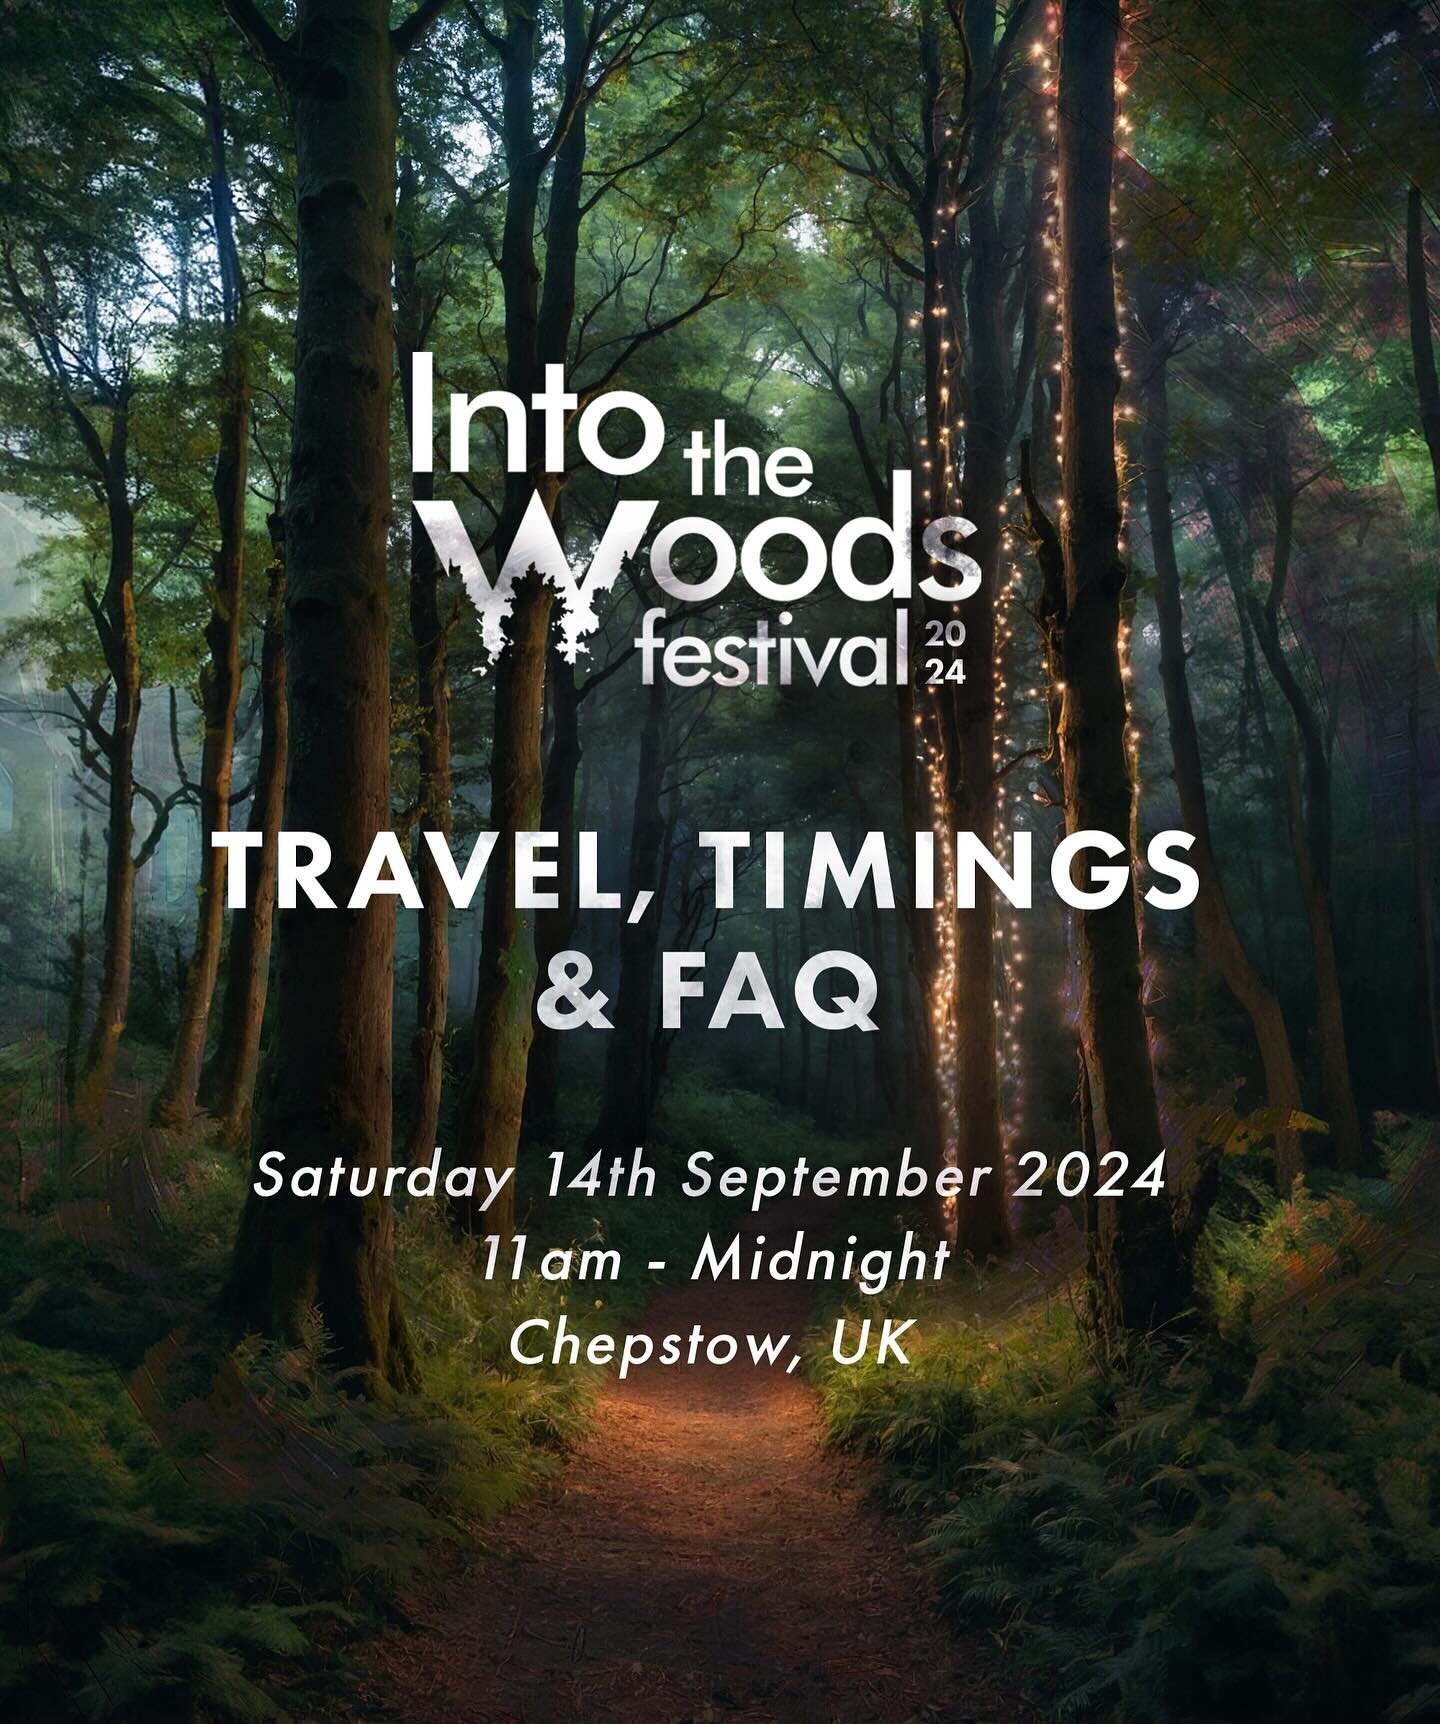 The window of opportunity for ITW 2024 opens this week⏳

Swipe for key info on reaching our enchanted grove this year. 

Link in bio to access tomorrow&rsquo;s release 🎟️